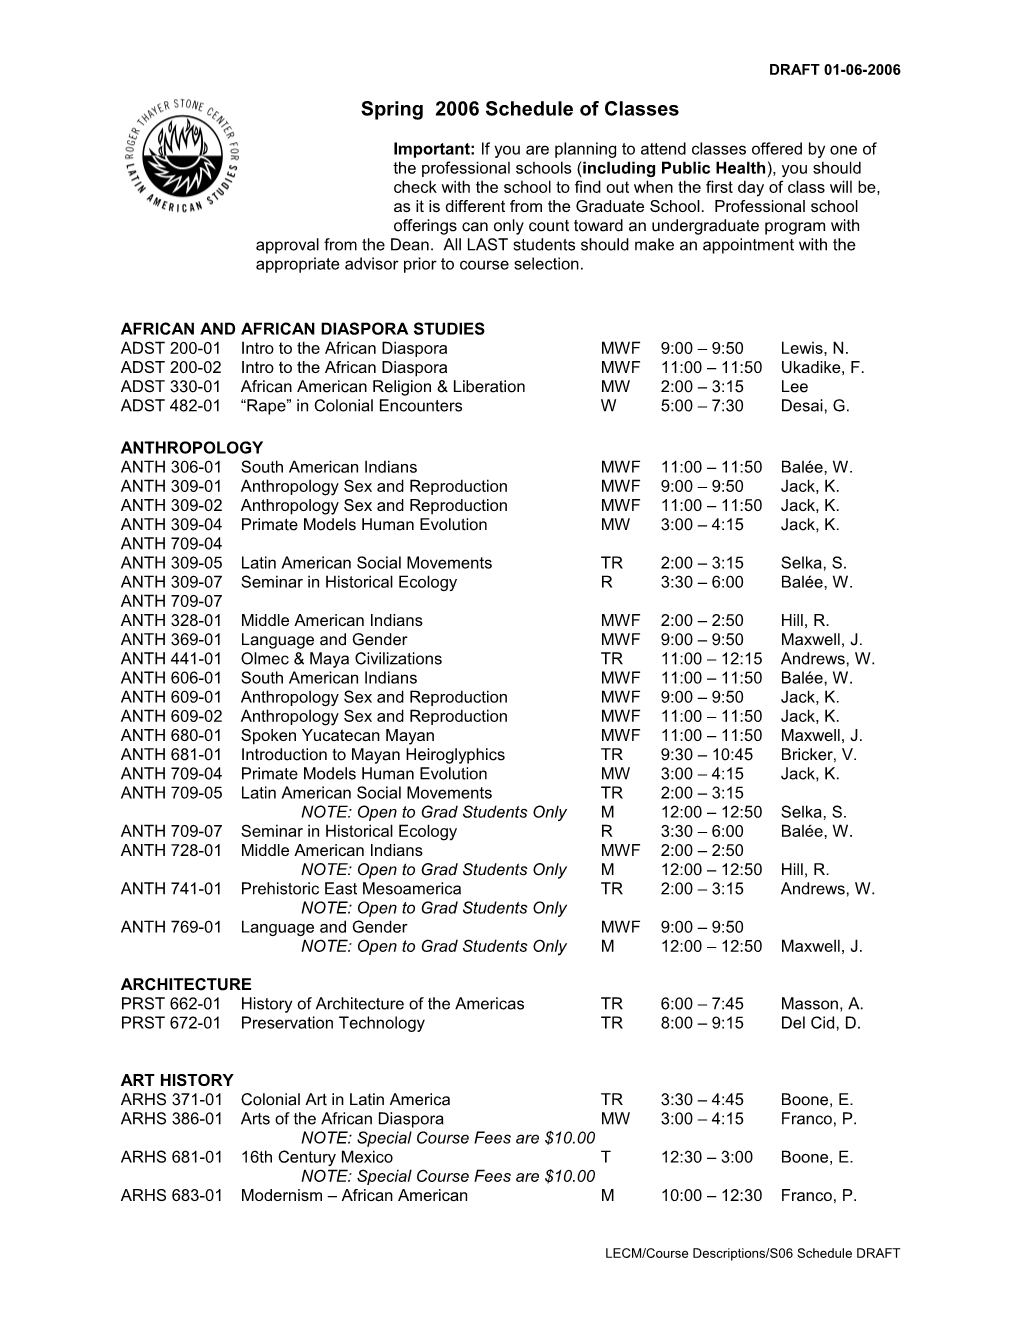 Spring 2003 Schedule of Classes